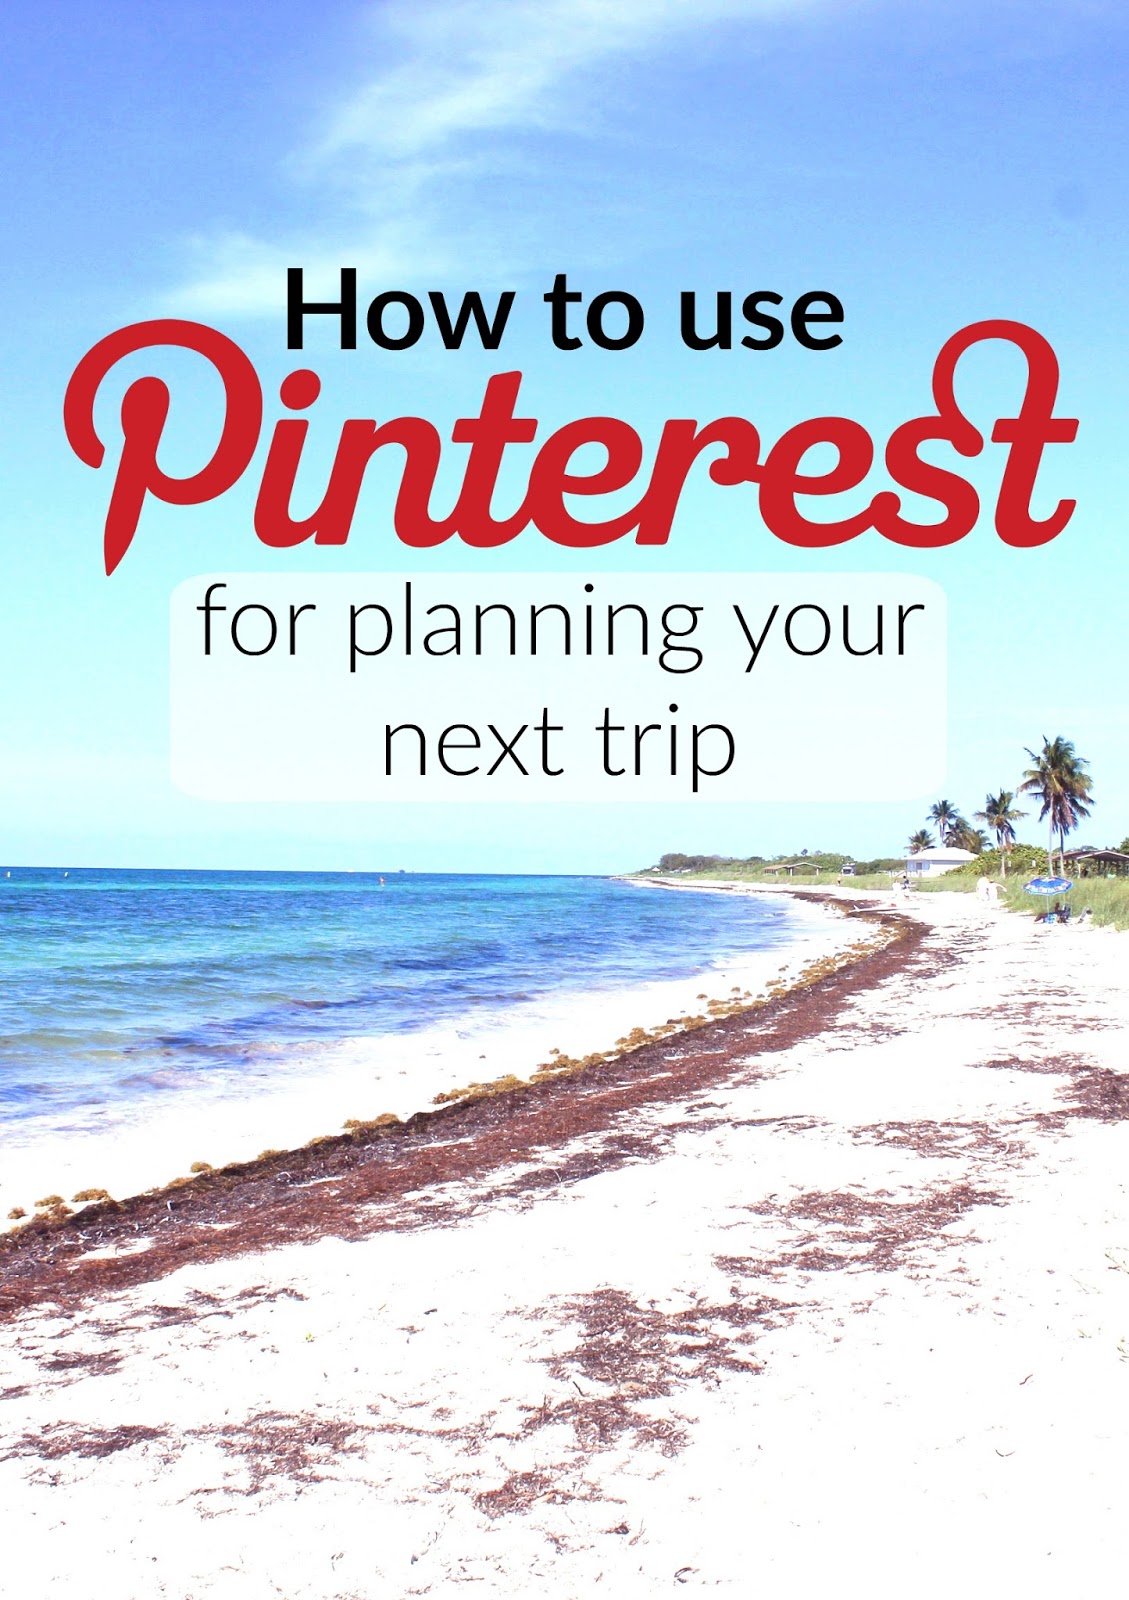 HOW TO USE PINTEREST FOR PLANNING YOUR NEXT TRIP